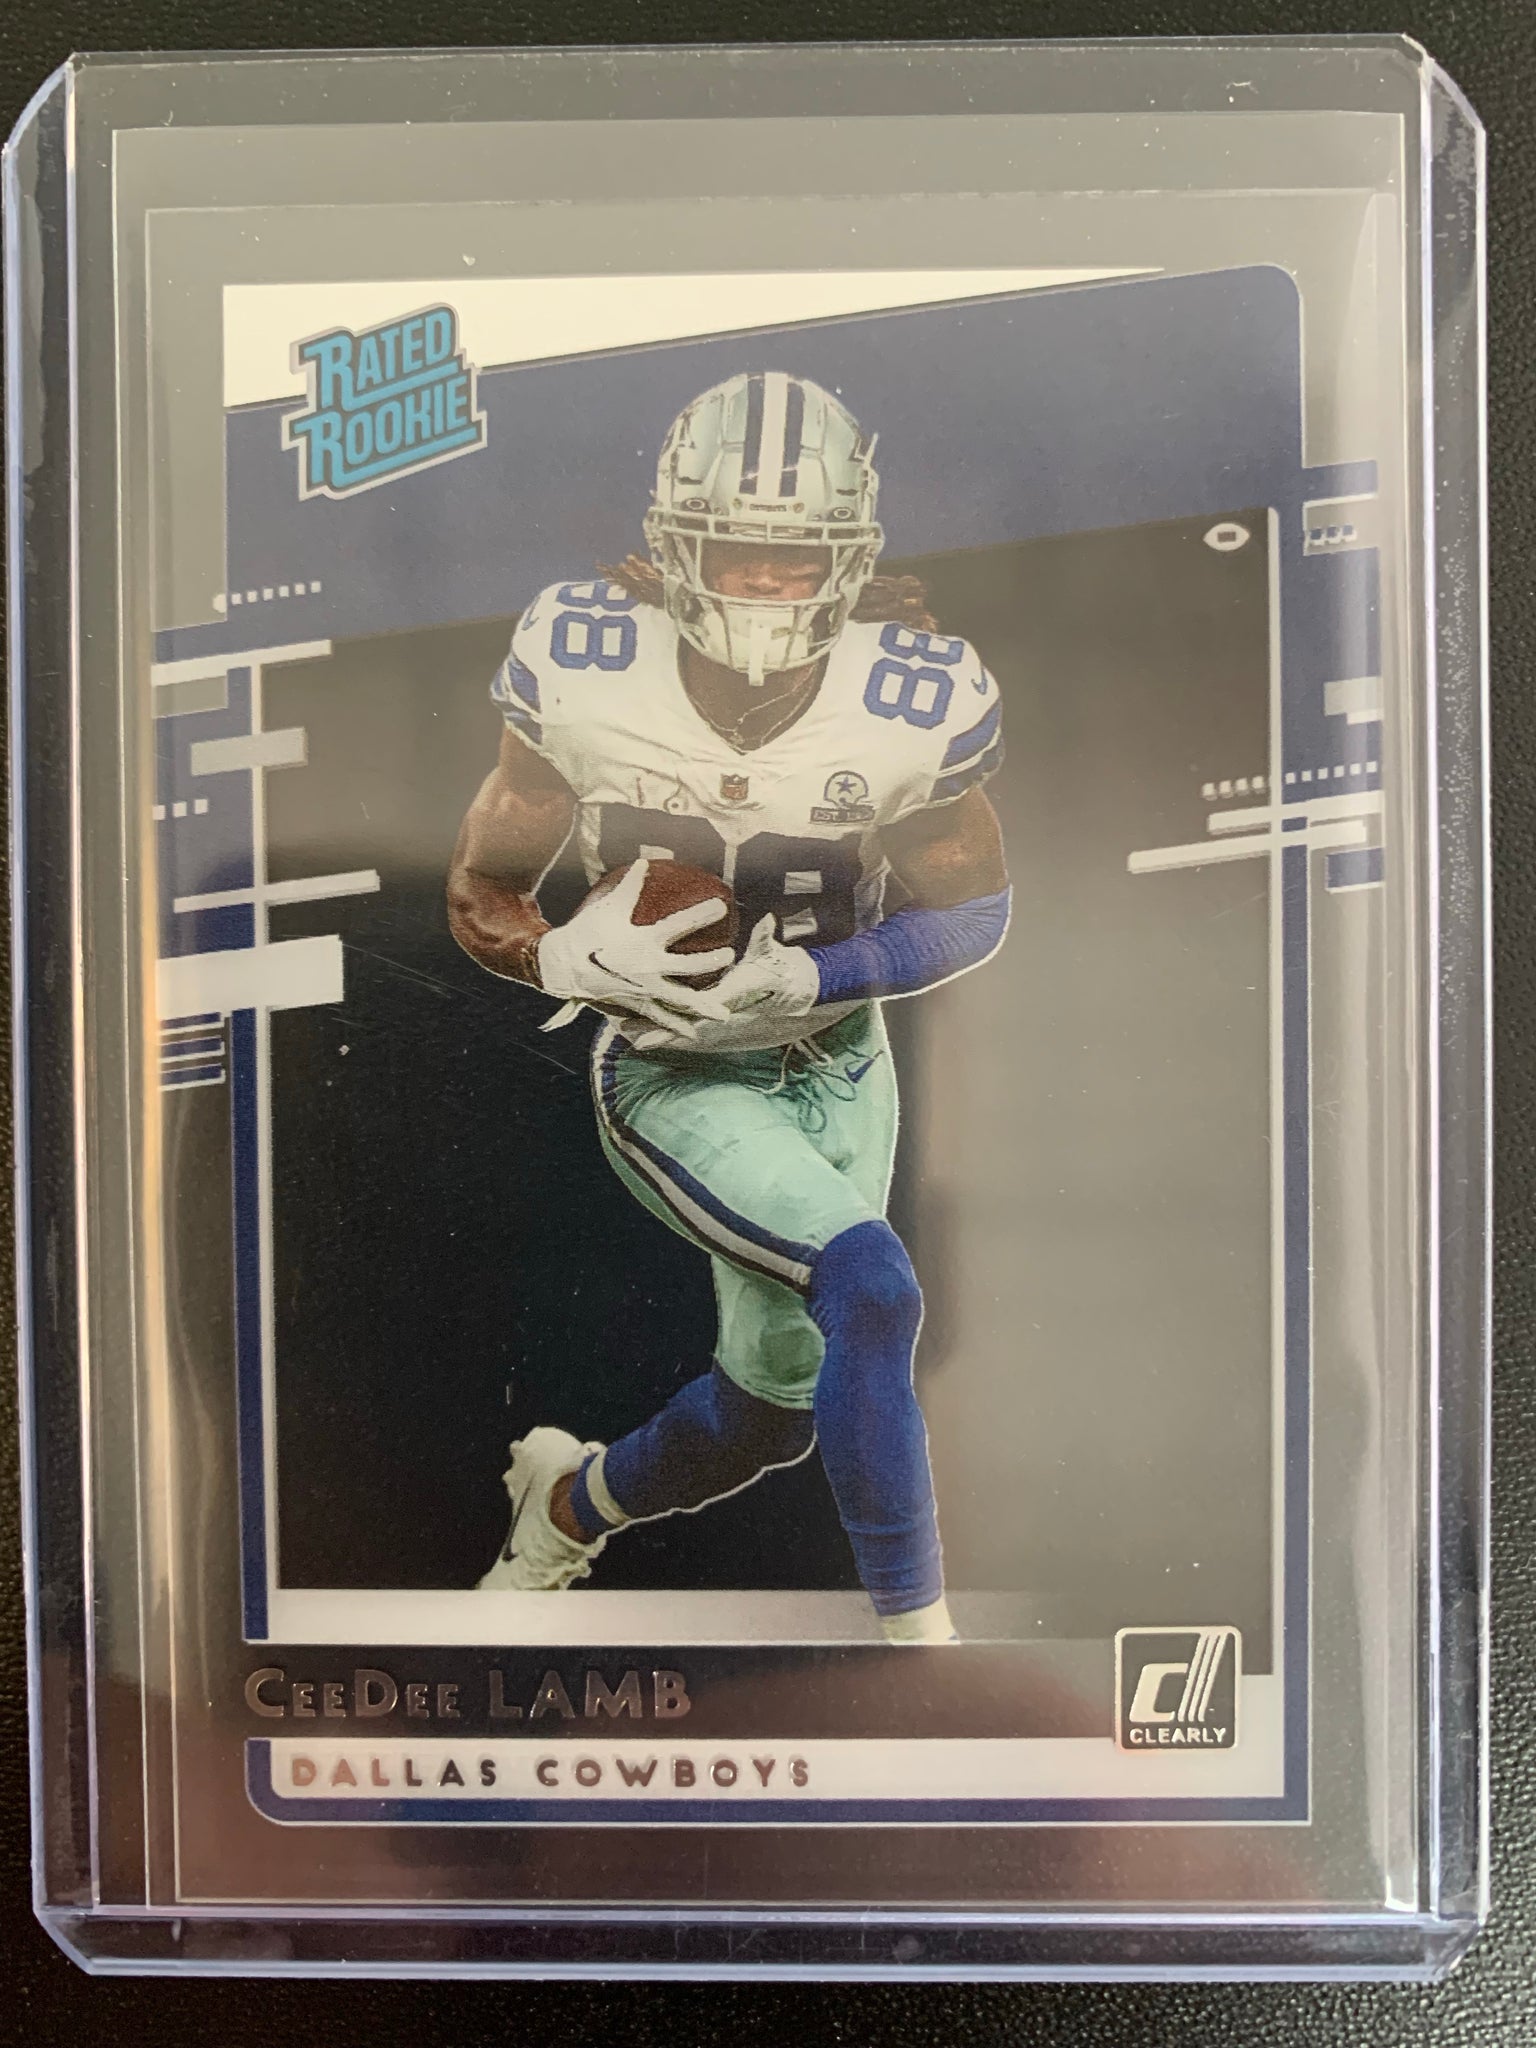 2020 PANINI CHRONICLES FOOTBALL #RR-CL DALLAS COWBOYS - CEE DEE LAMB CLEARLY DONRUSS RATED ROOKIE CARD